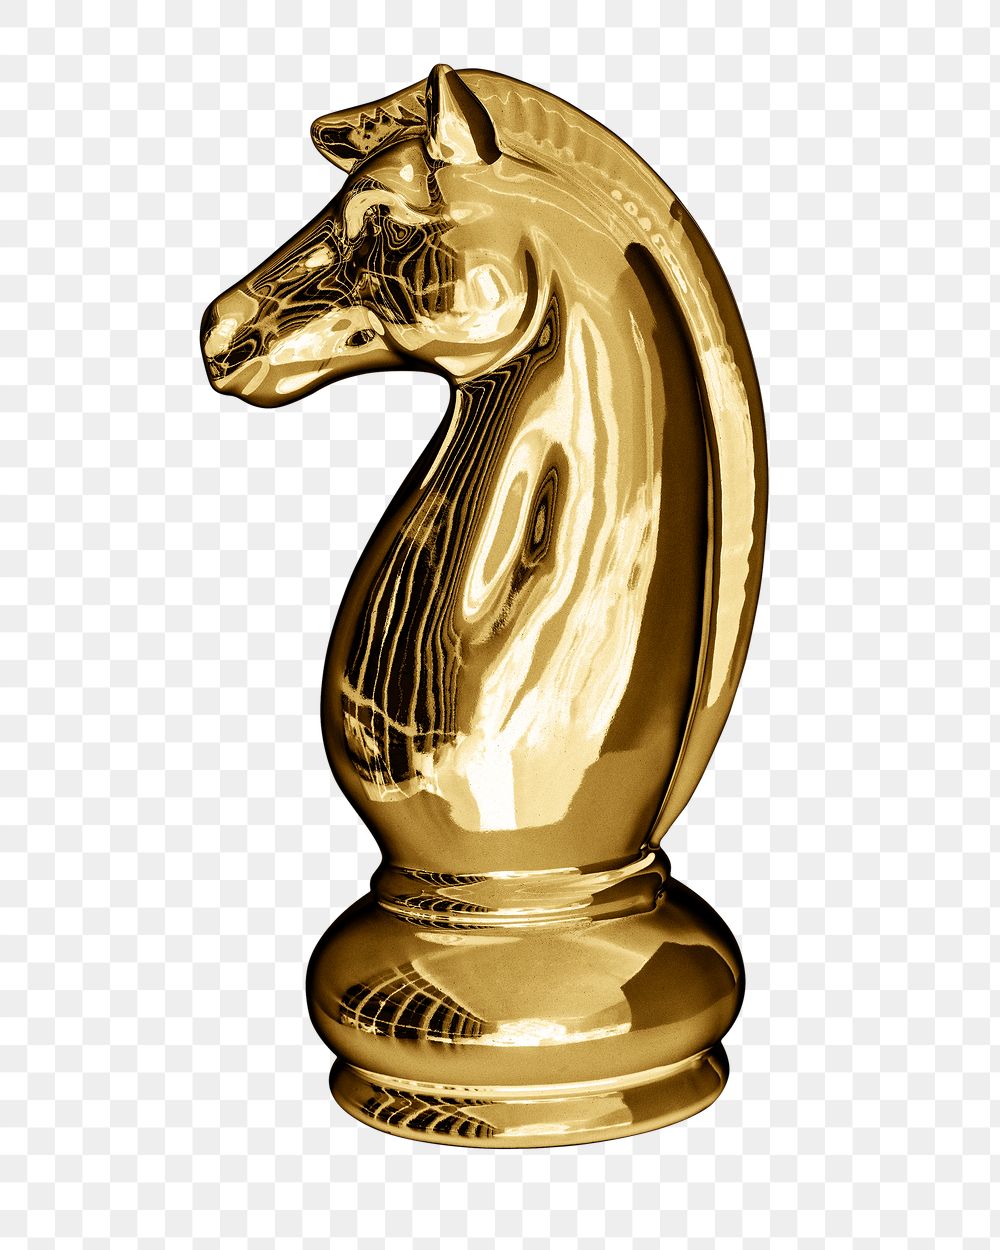 Chess Horse Gold Image Wallpaper